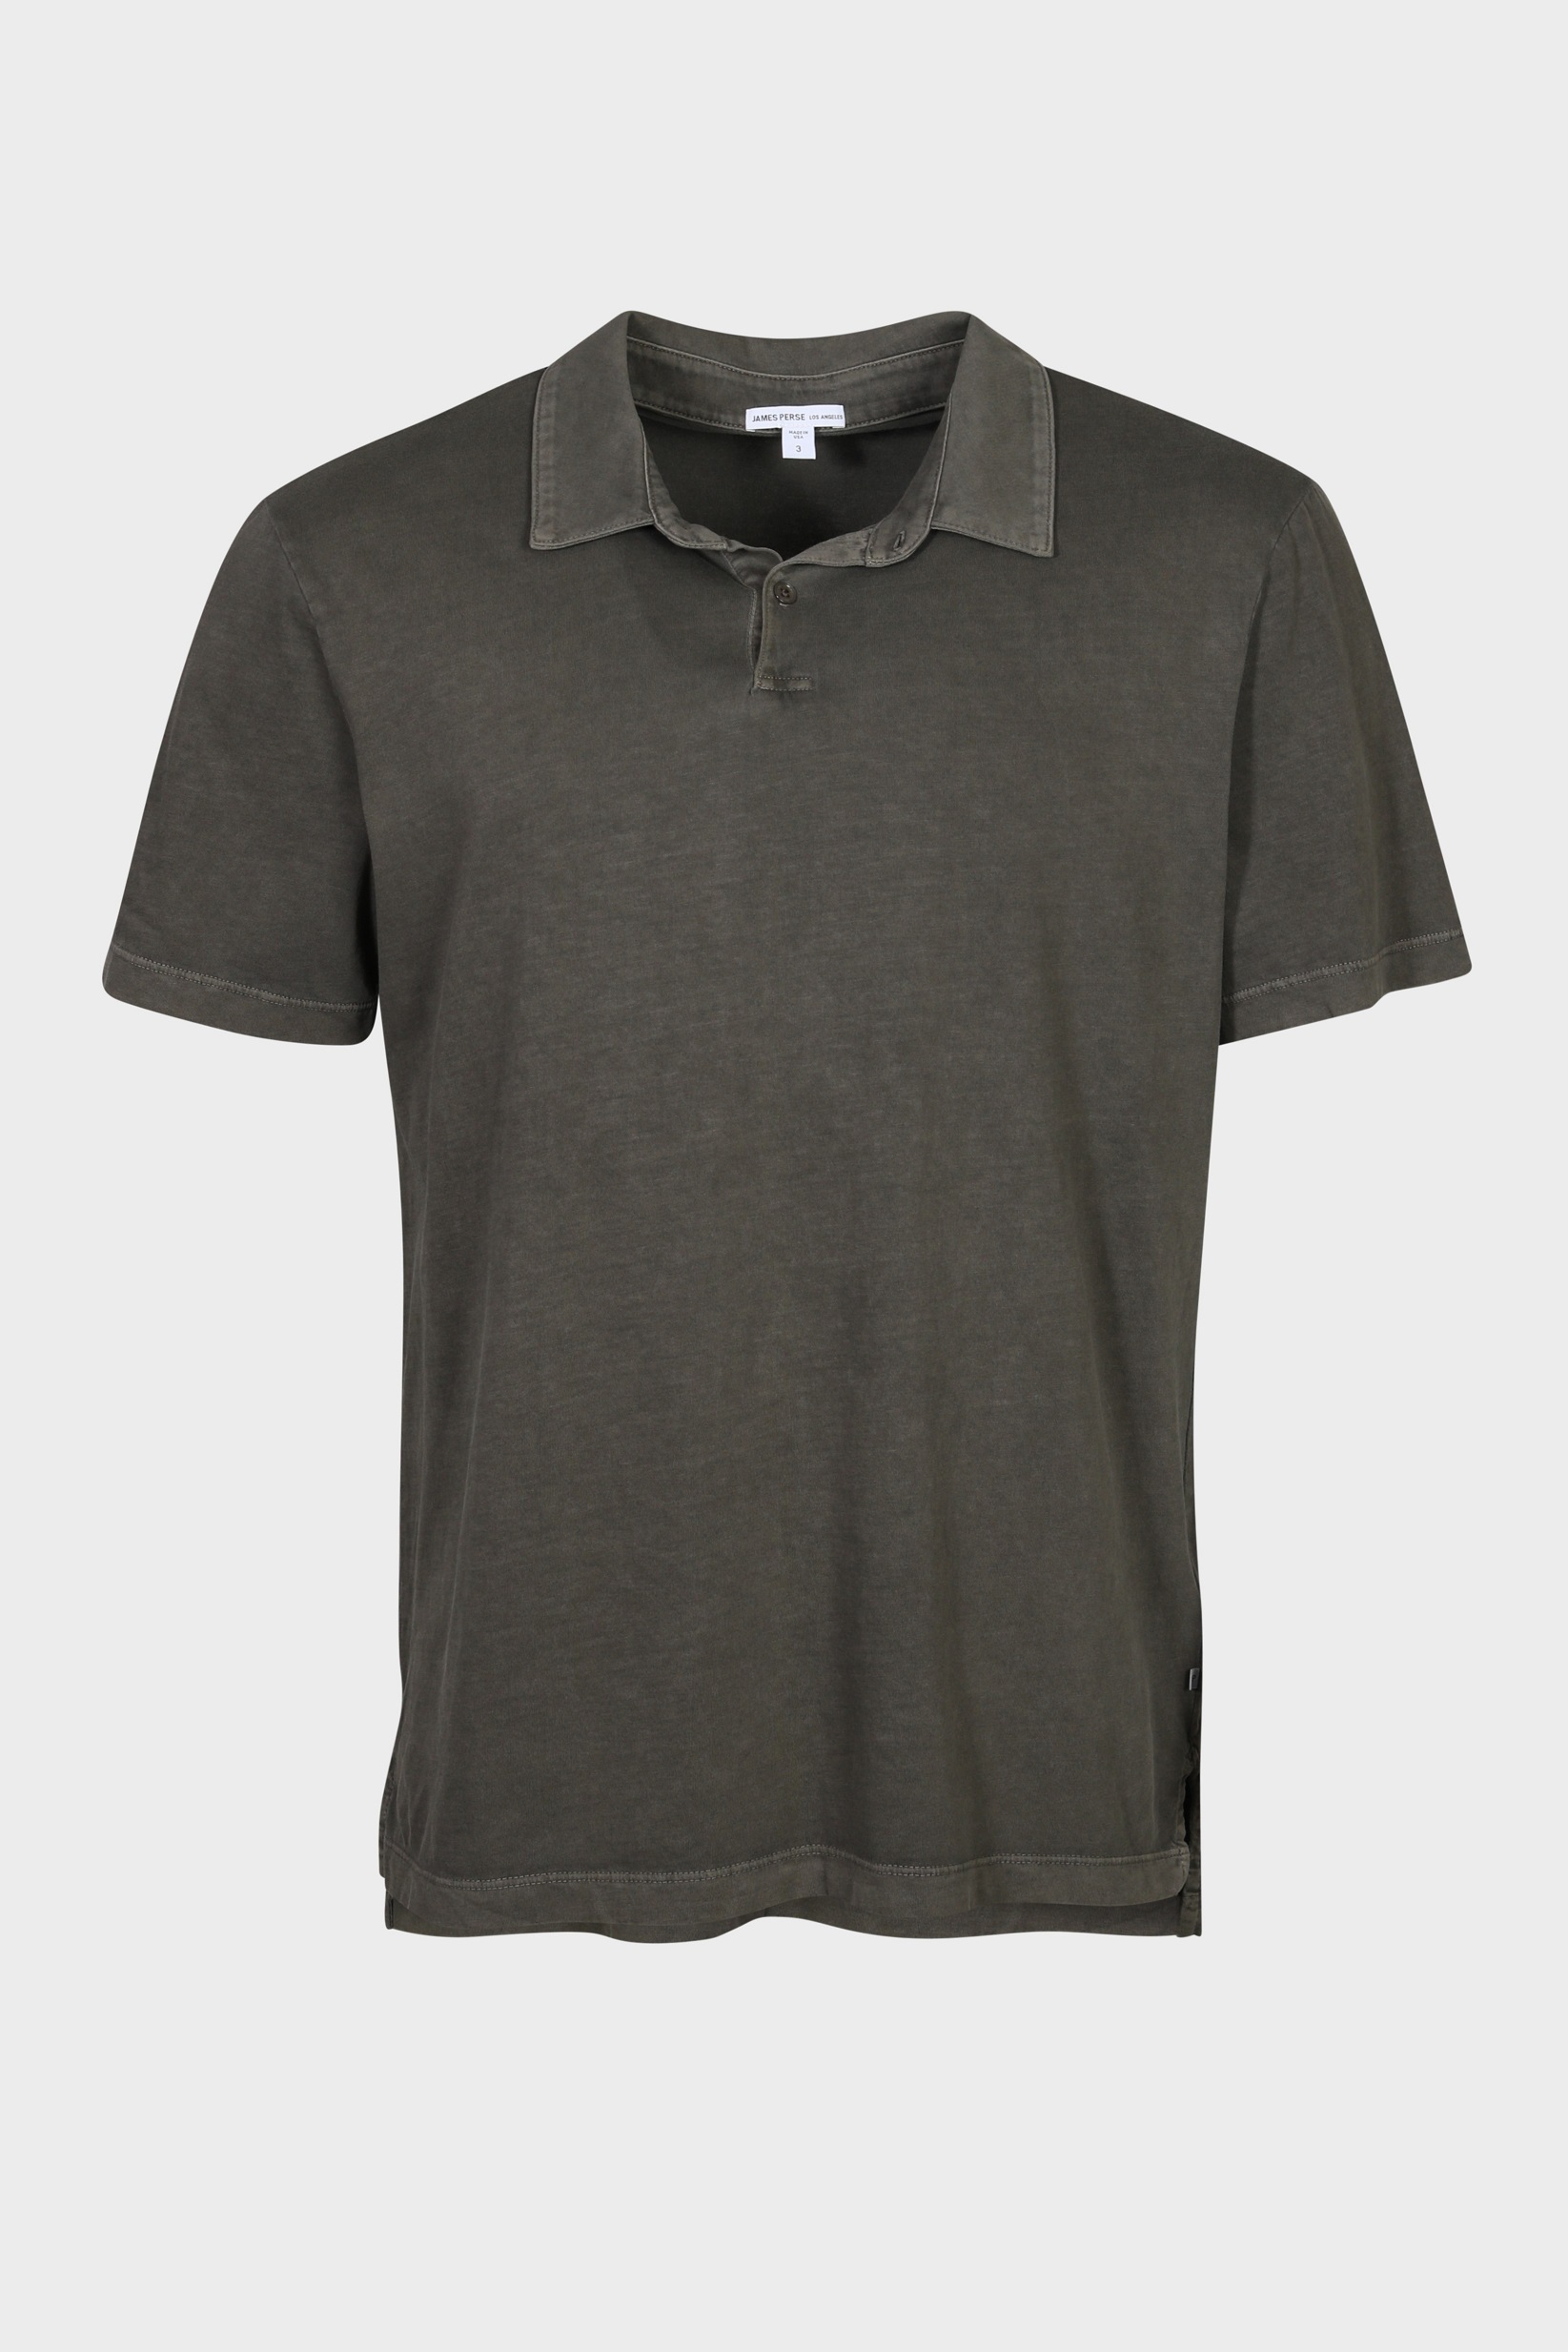 JAMES PERSE Revised Standard Polo in Washed Olive